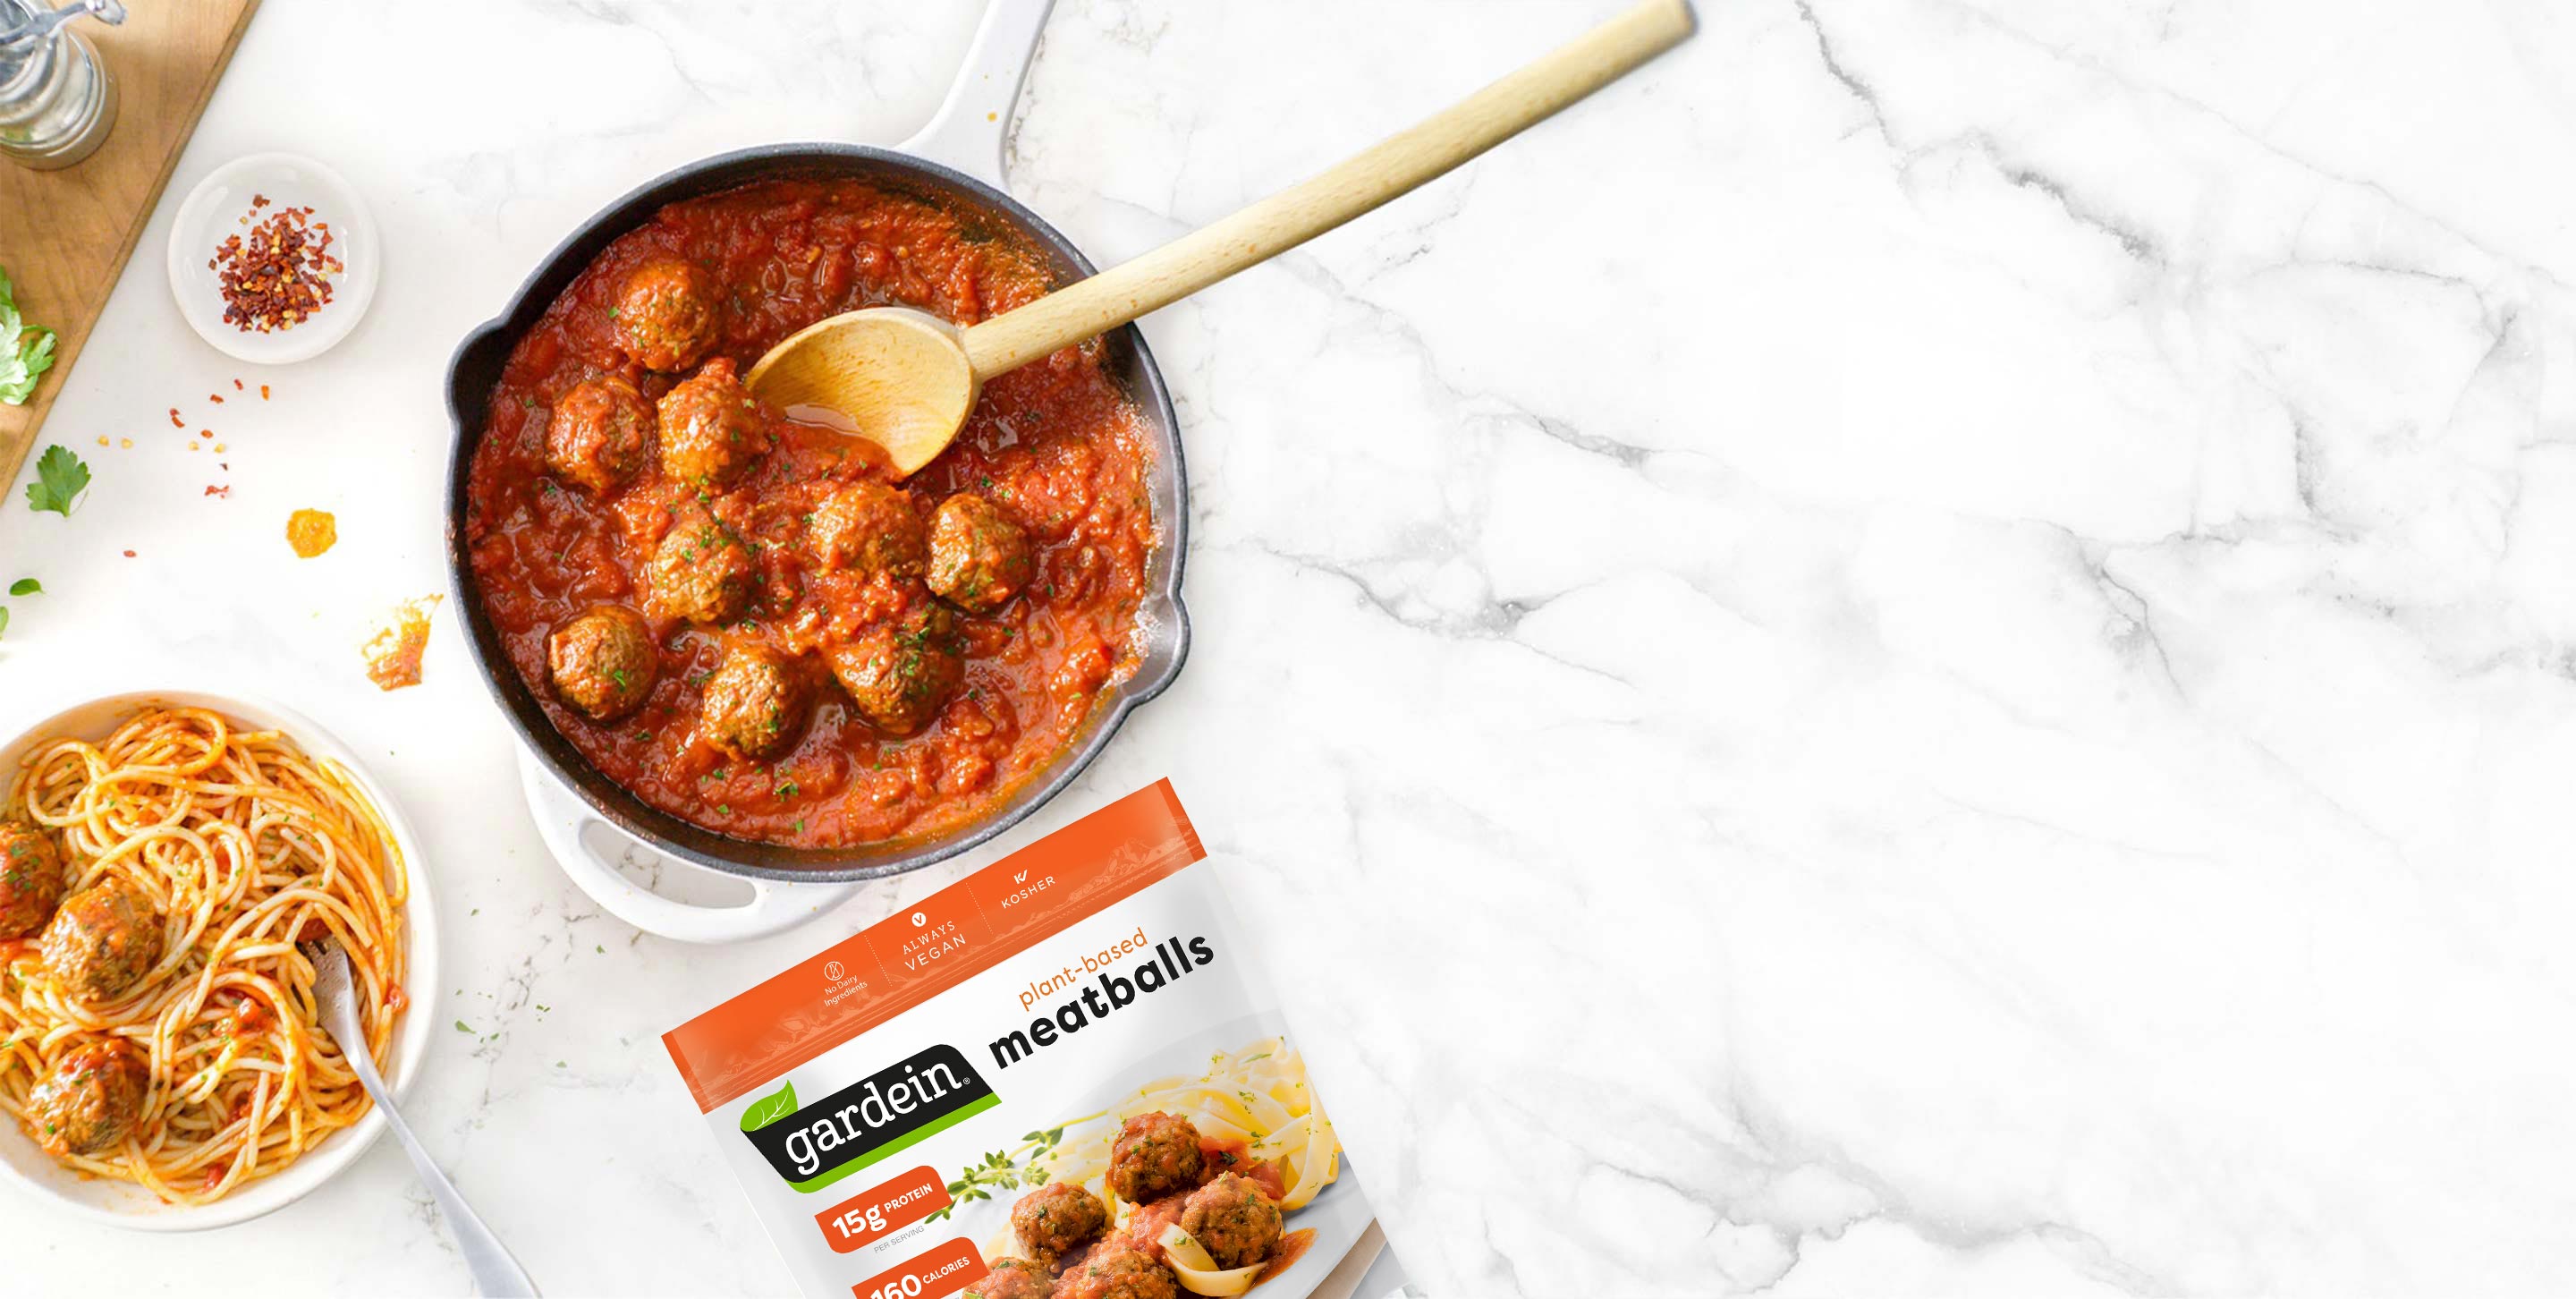 Gardein plant-based meatballs in a bowl on a table